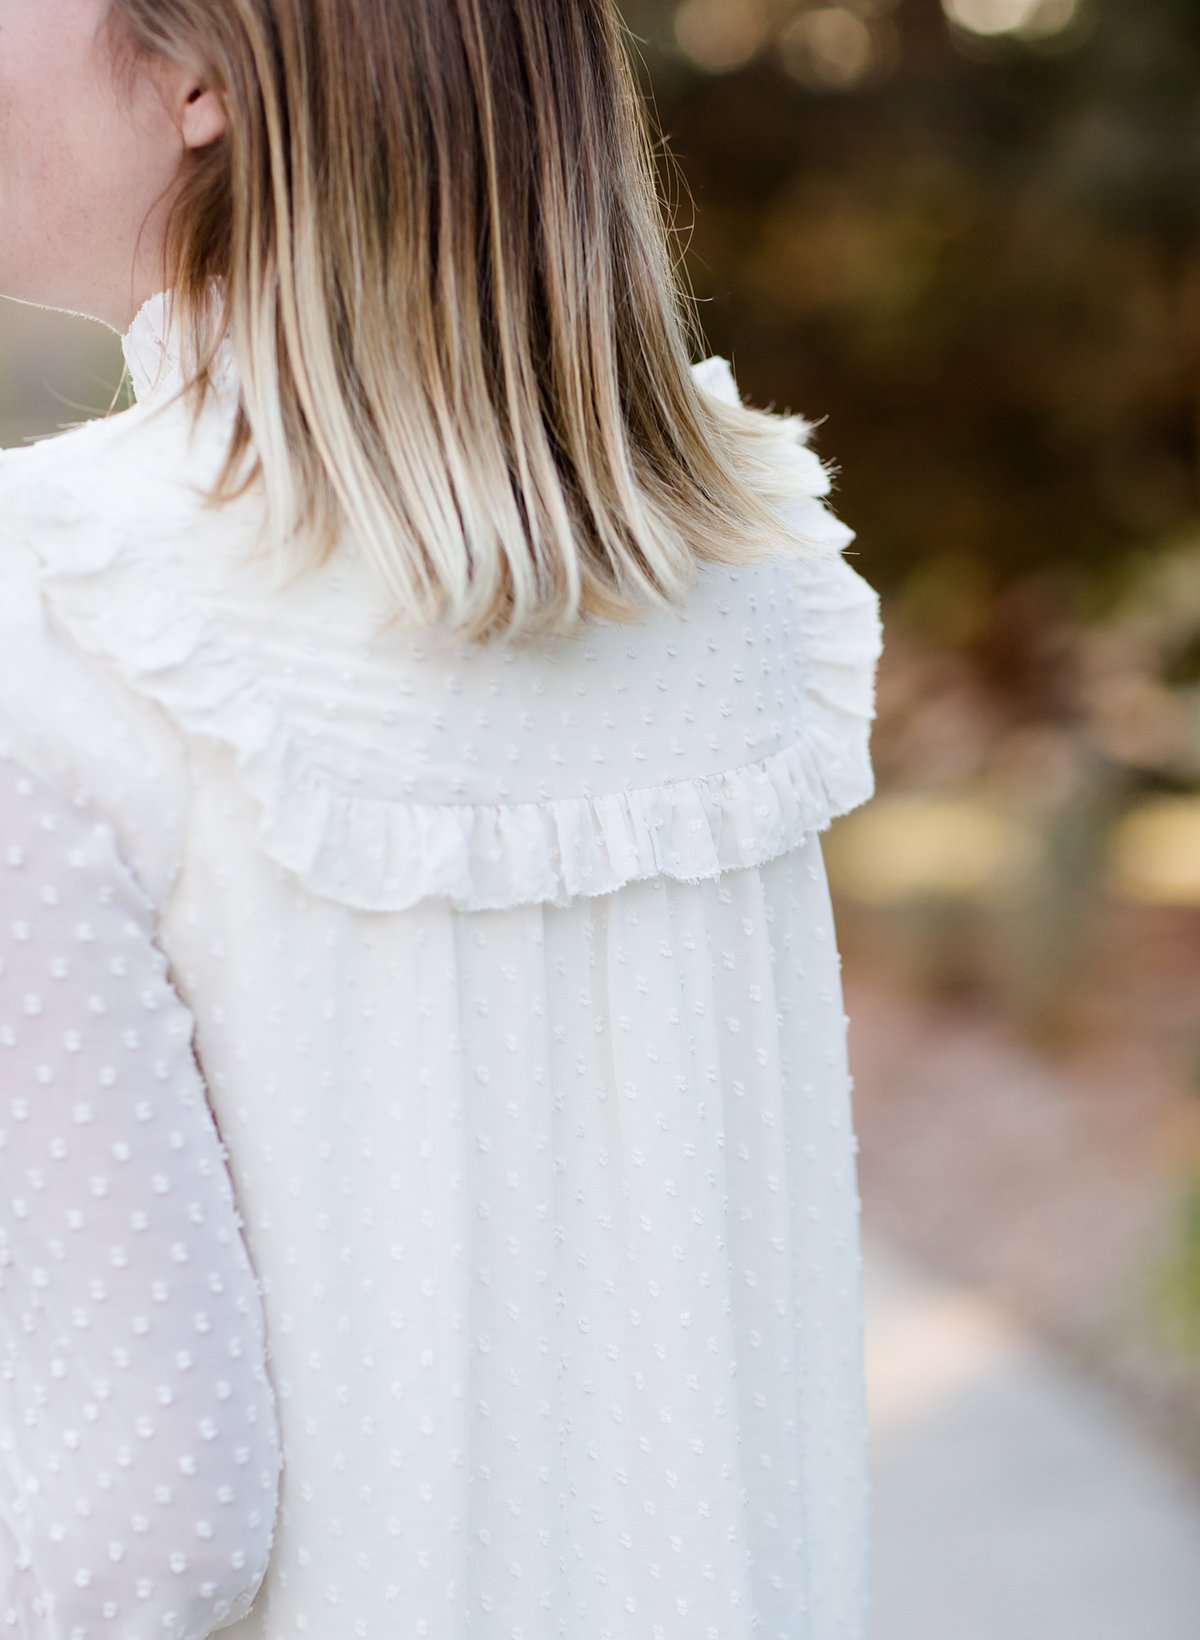 Young woman wearing a vintage inspired ruffle and layered cream colored blouse. This blouse features ruffles and ribbon details.